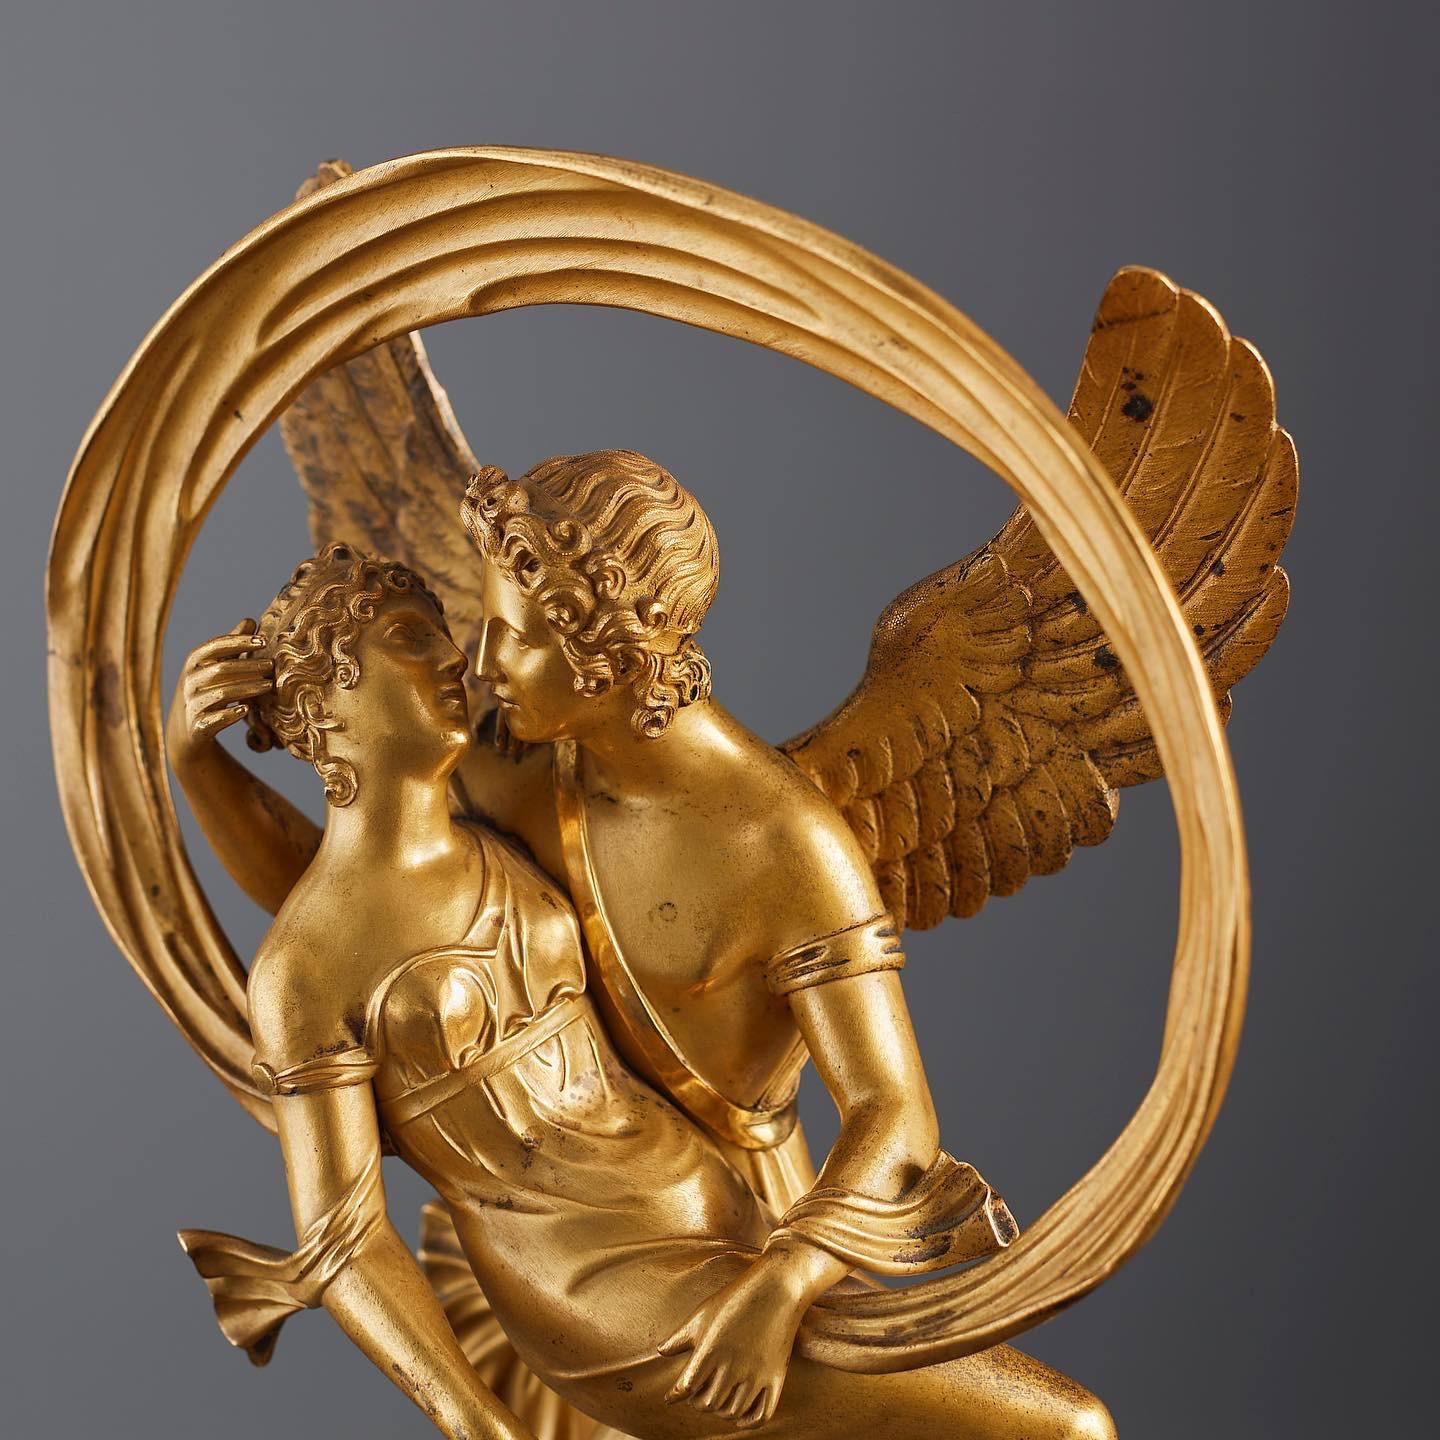 This beautiful Empire bronze sculpture shows winged Amor carrying Venus, she is holding a wreath in her right hand, surrounded within a circular cloth in the wind. Finely chiseled gilt bronze on a marble pedestal (ver de mer marble). 

Provenance: